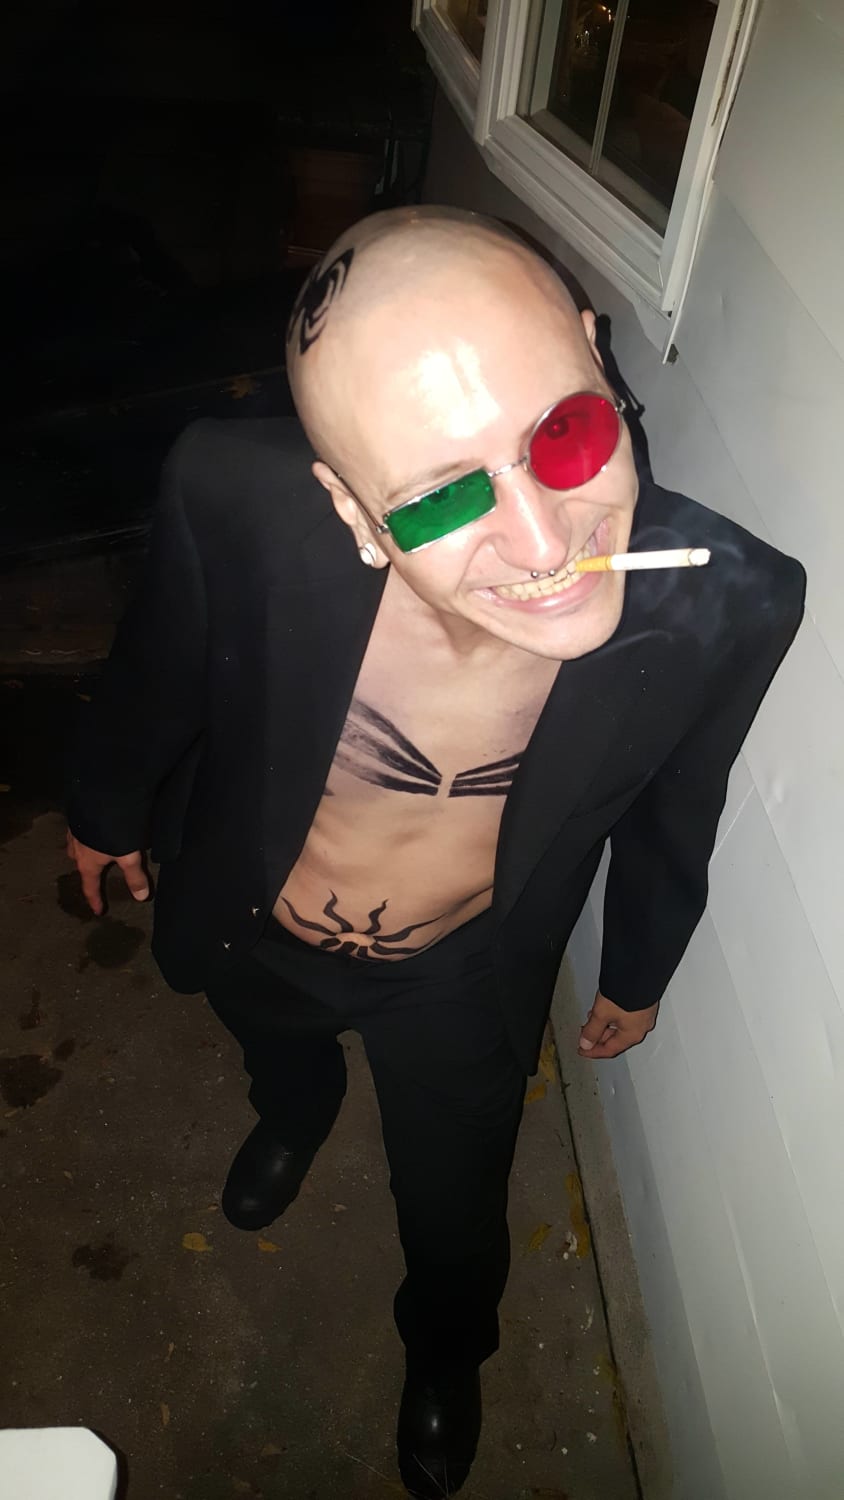 Since Halloween is relatively cancelled this year, here's a throwback to my favorite Halloween costume I've done - Spider Jerusalem from Transmetropolitan.